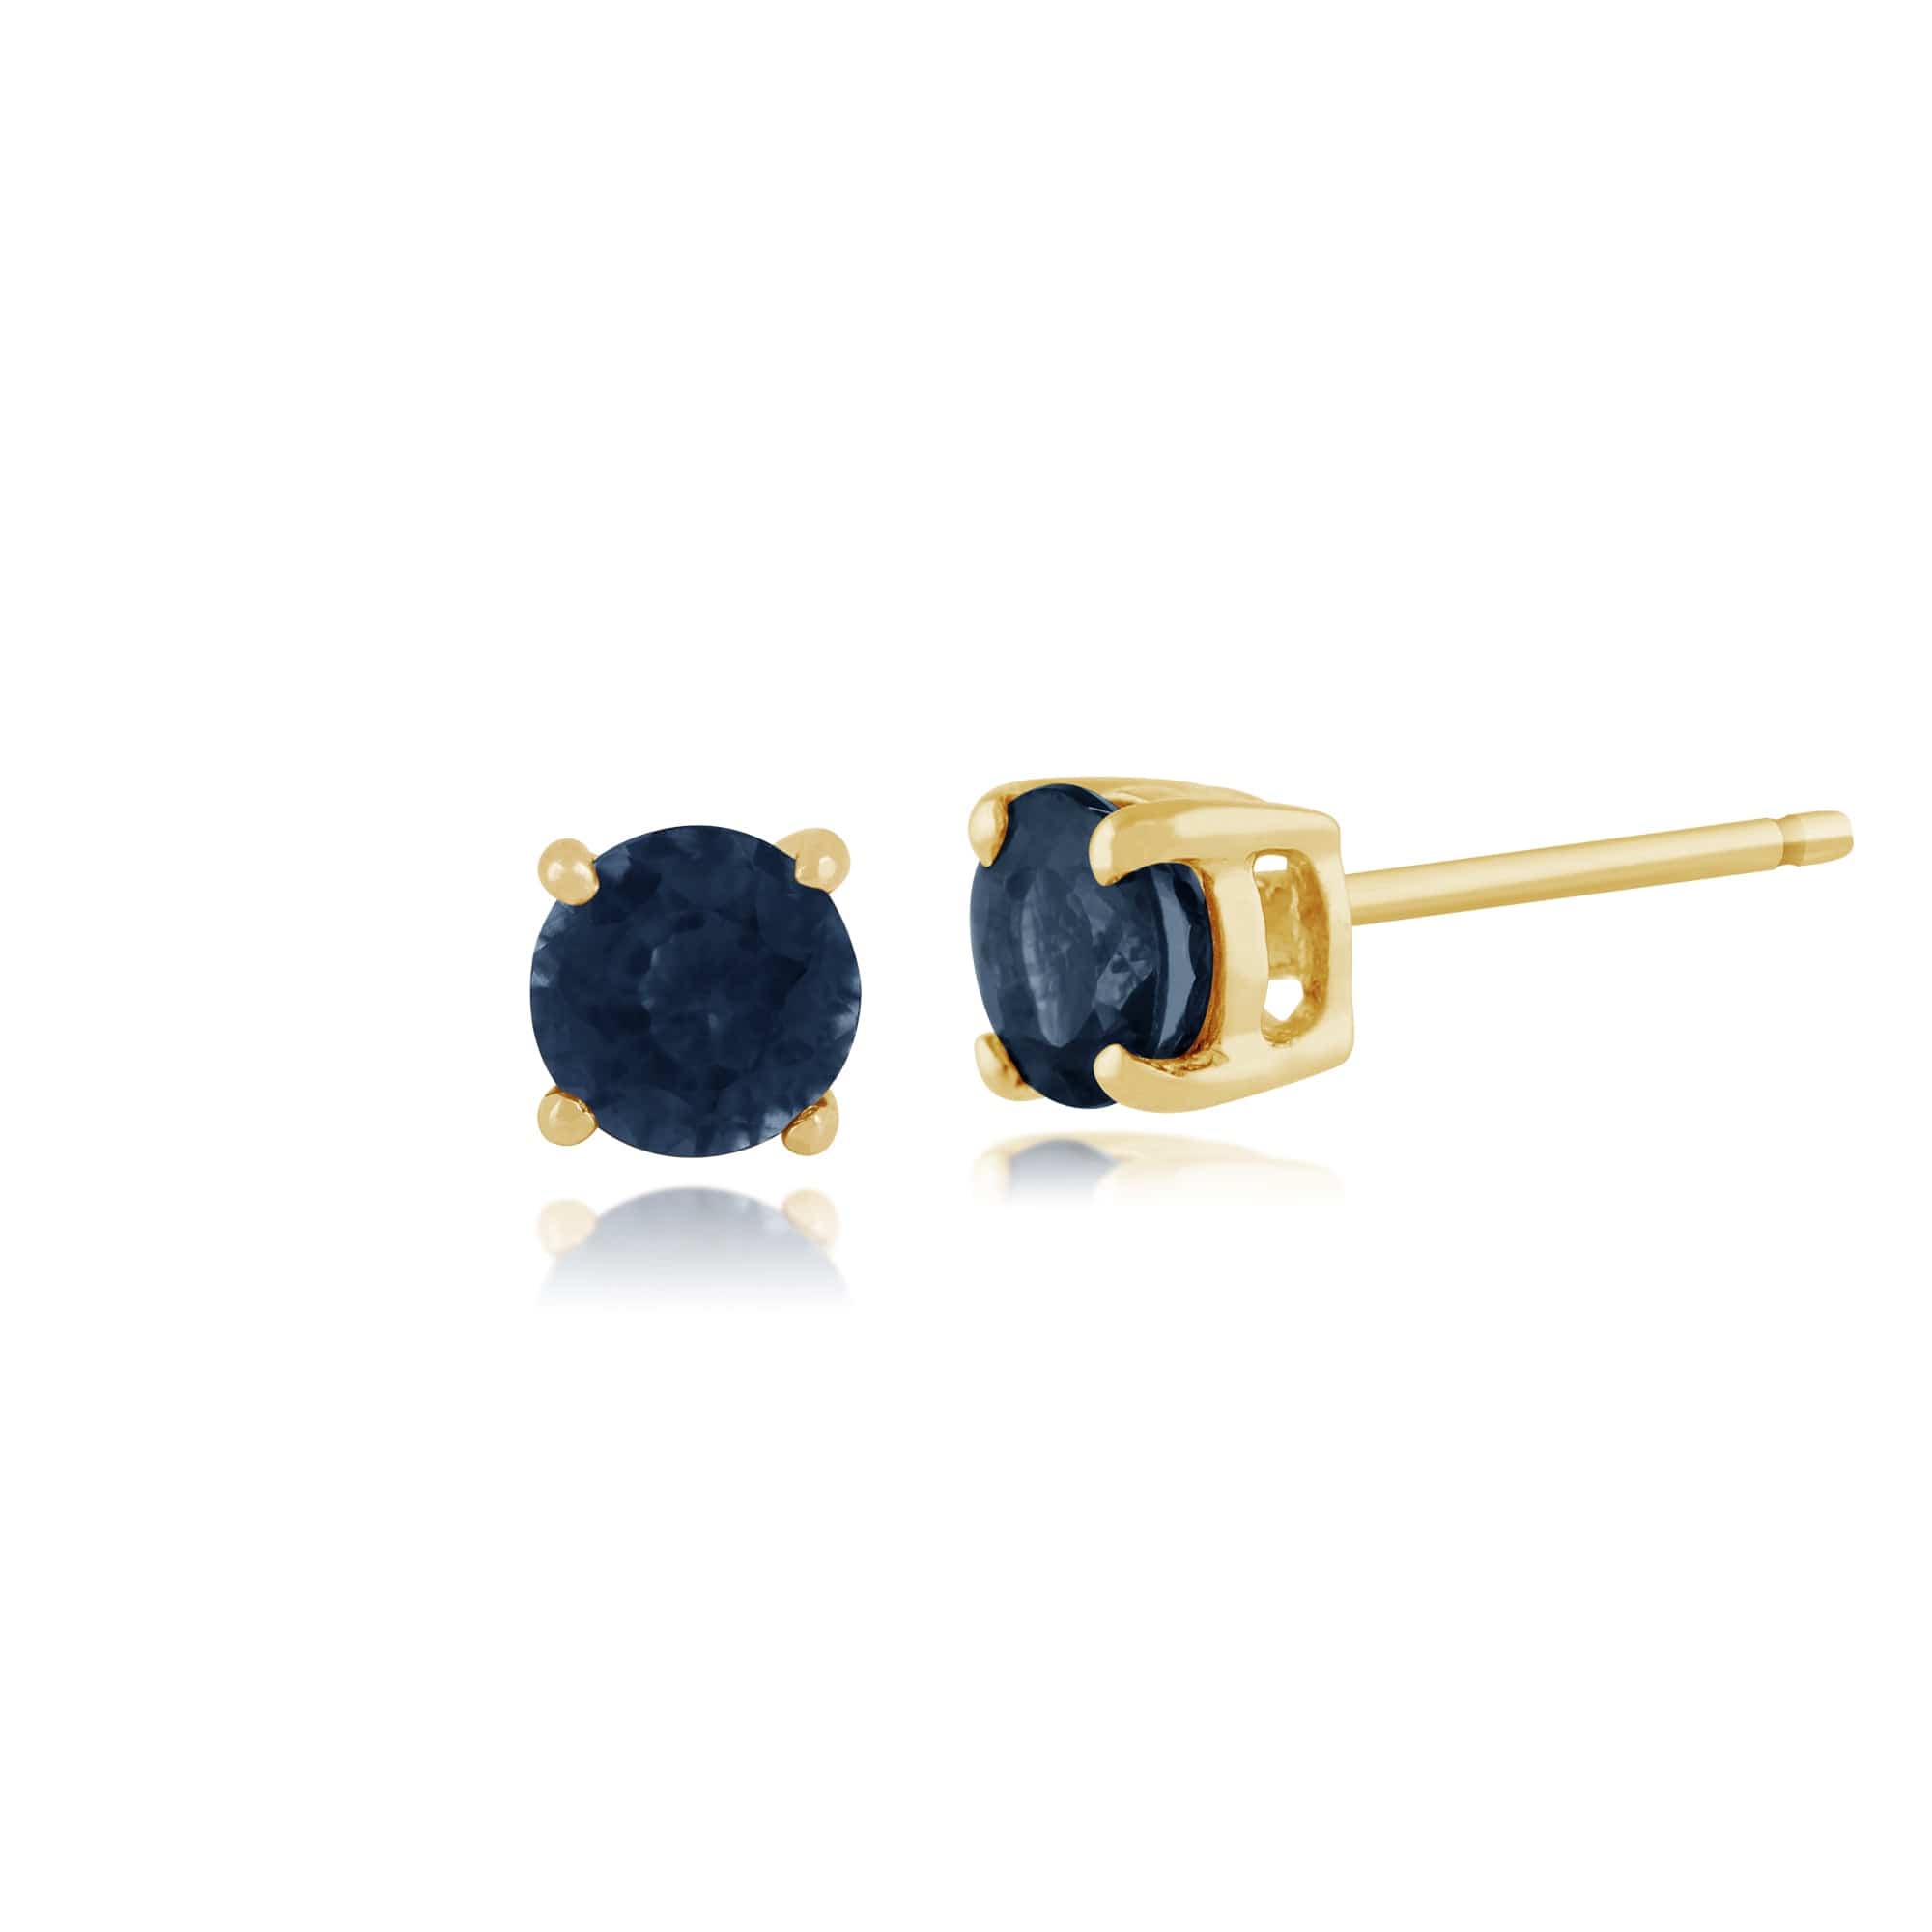 Classic Round Blue Sapphire Stud Earrings with Detachable Diamond Halo Ear Jacket in 9ct Yellow Gold - Gemondo